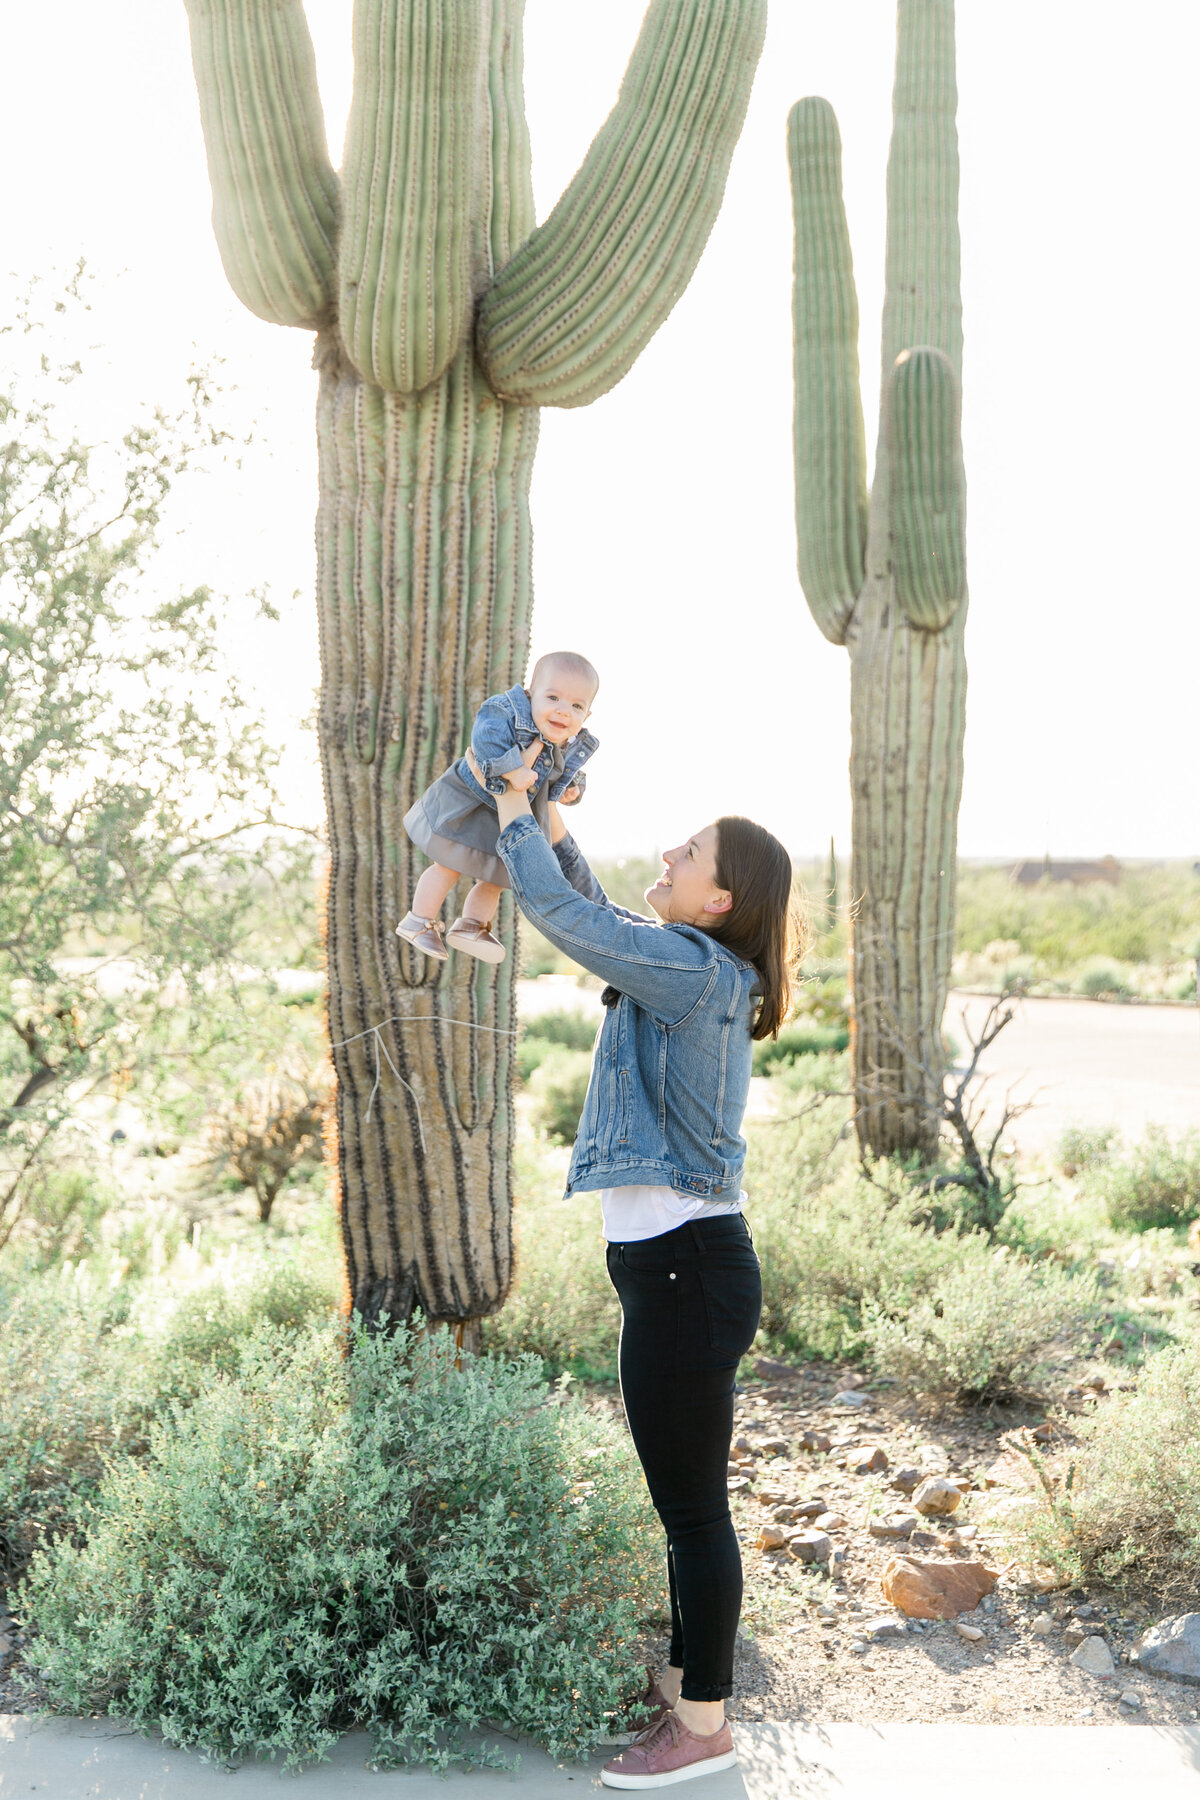 Karlie Colleen Photography - Scottsdale family photography - Victoria & family-26